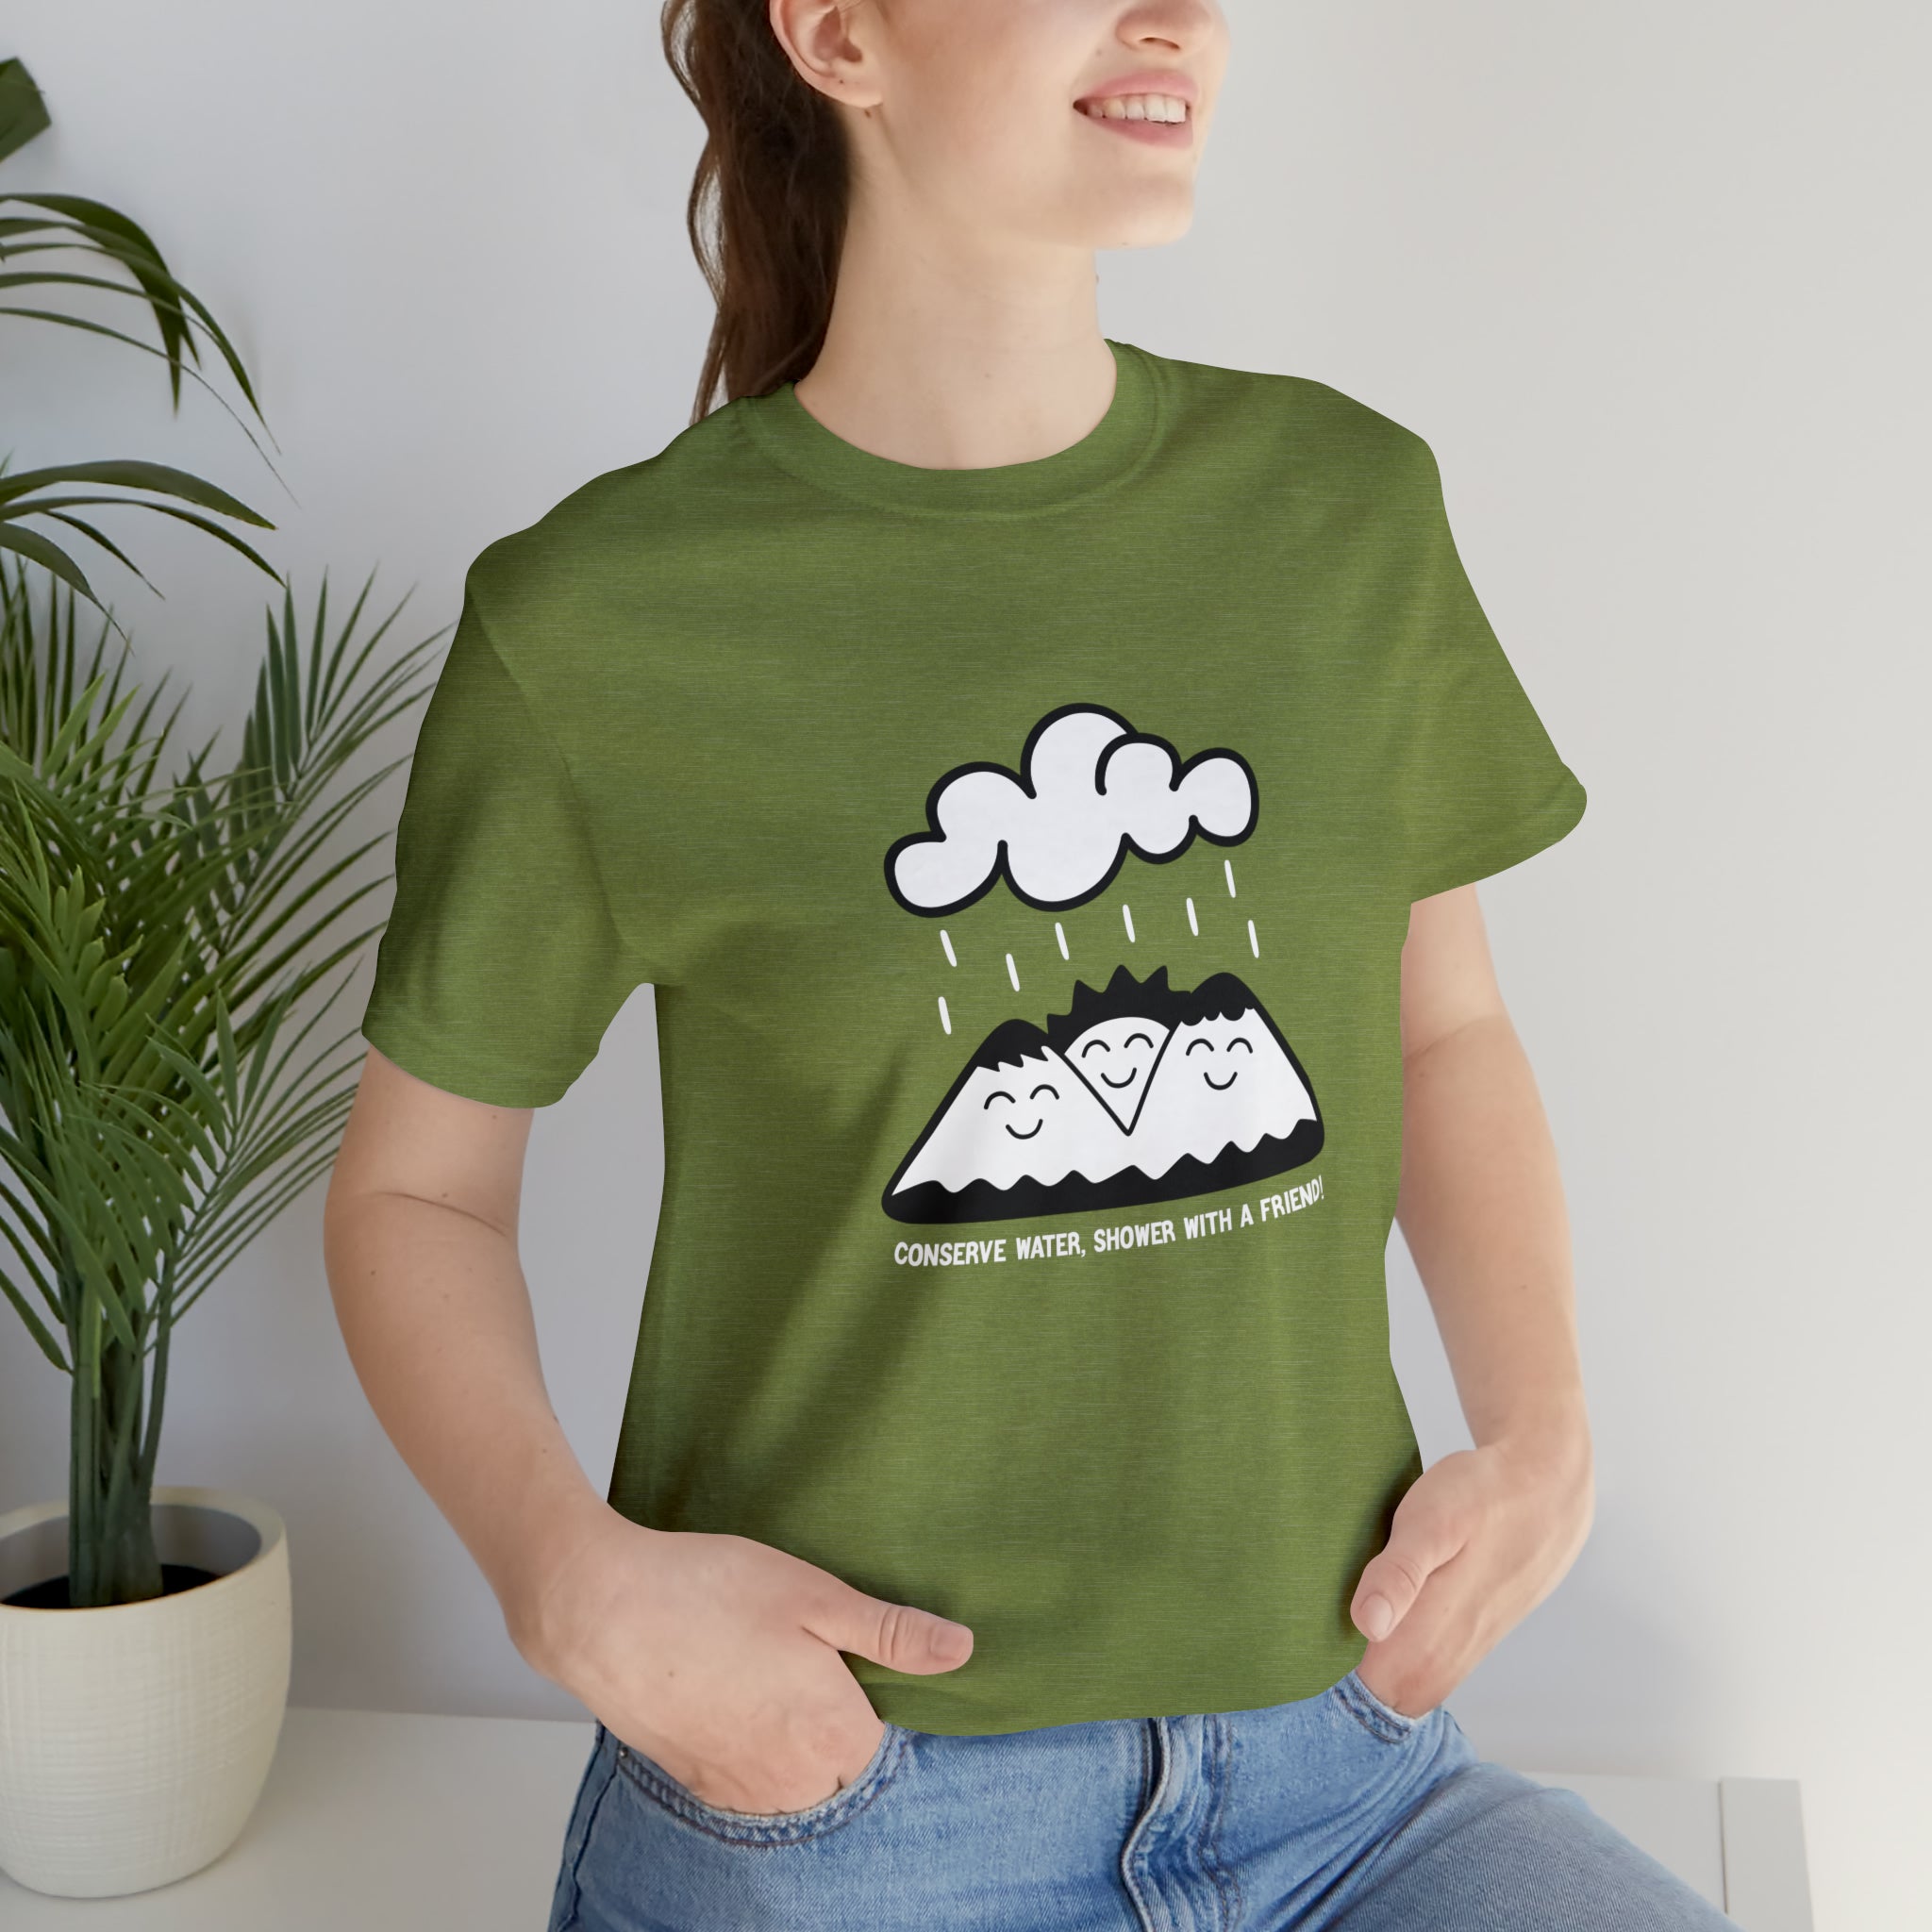 A woman wearing a Conserve Water Shower with a Friend T-Shirt with clouds on it.